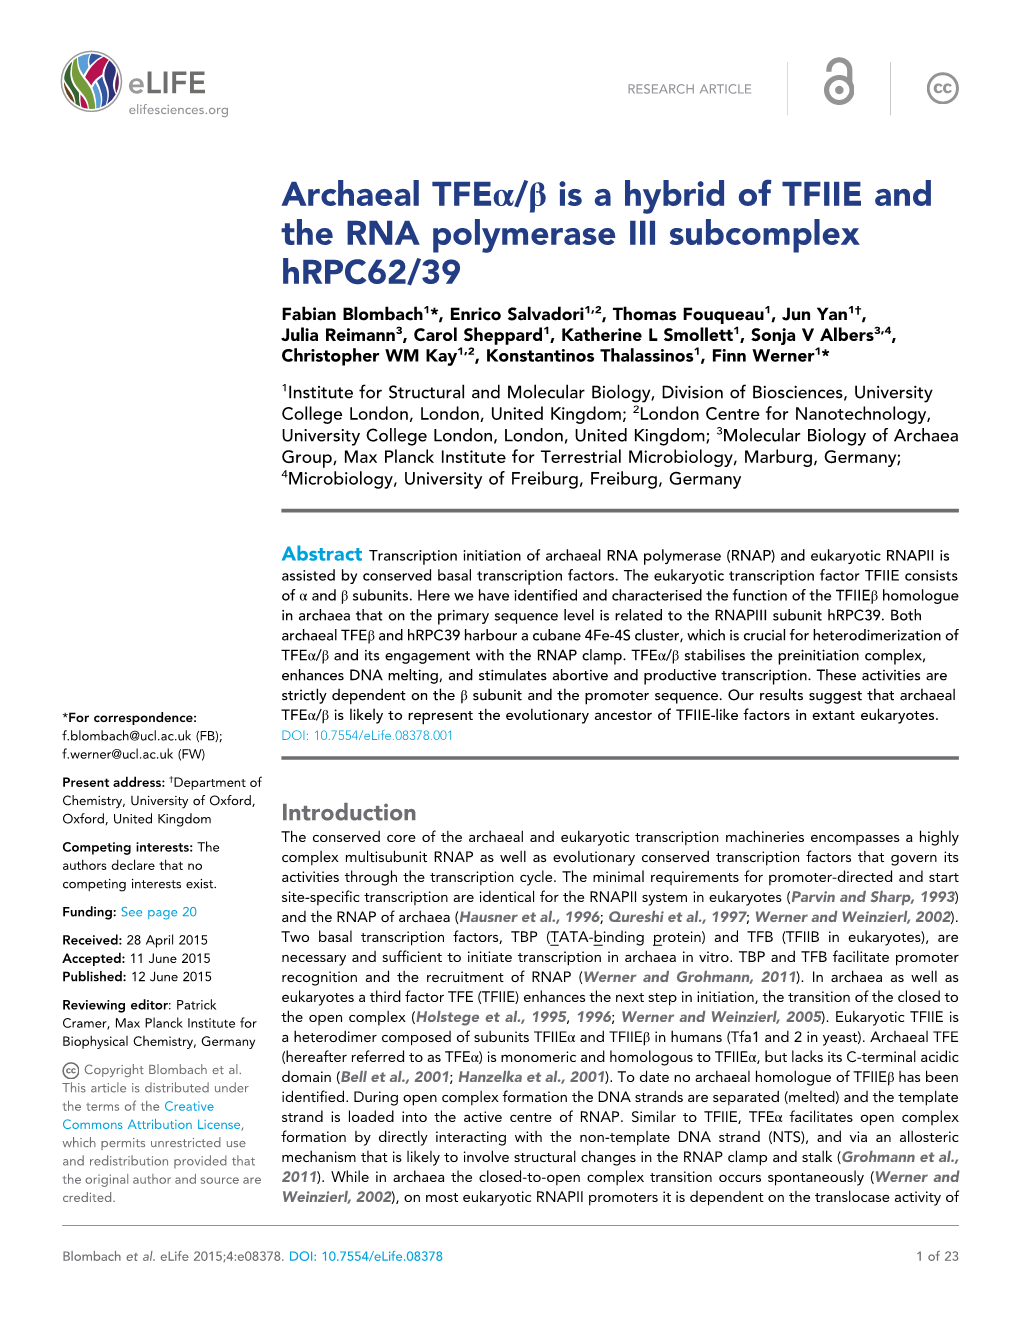 Archaeal Tfeα/Β Is a Hybrid of TFIIE and the RNA Polymerase III